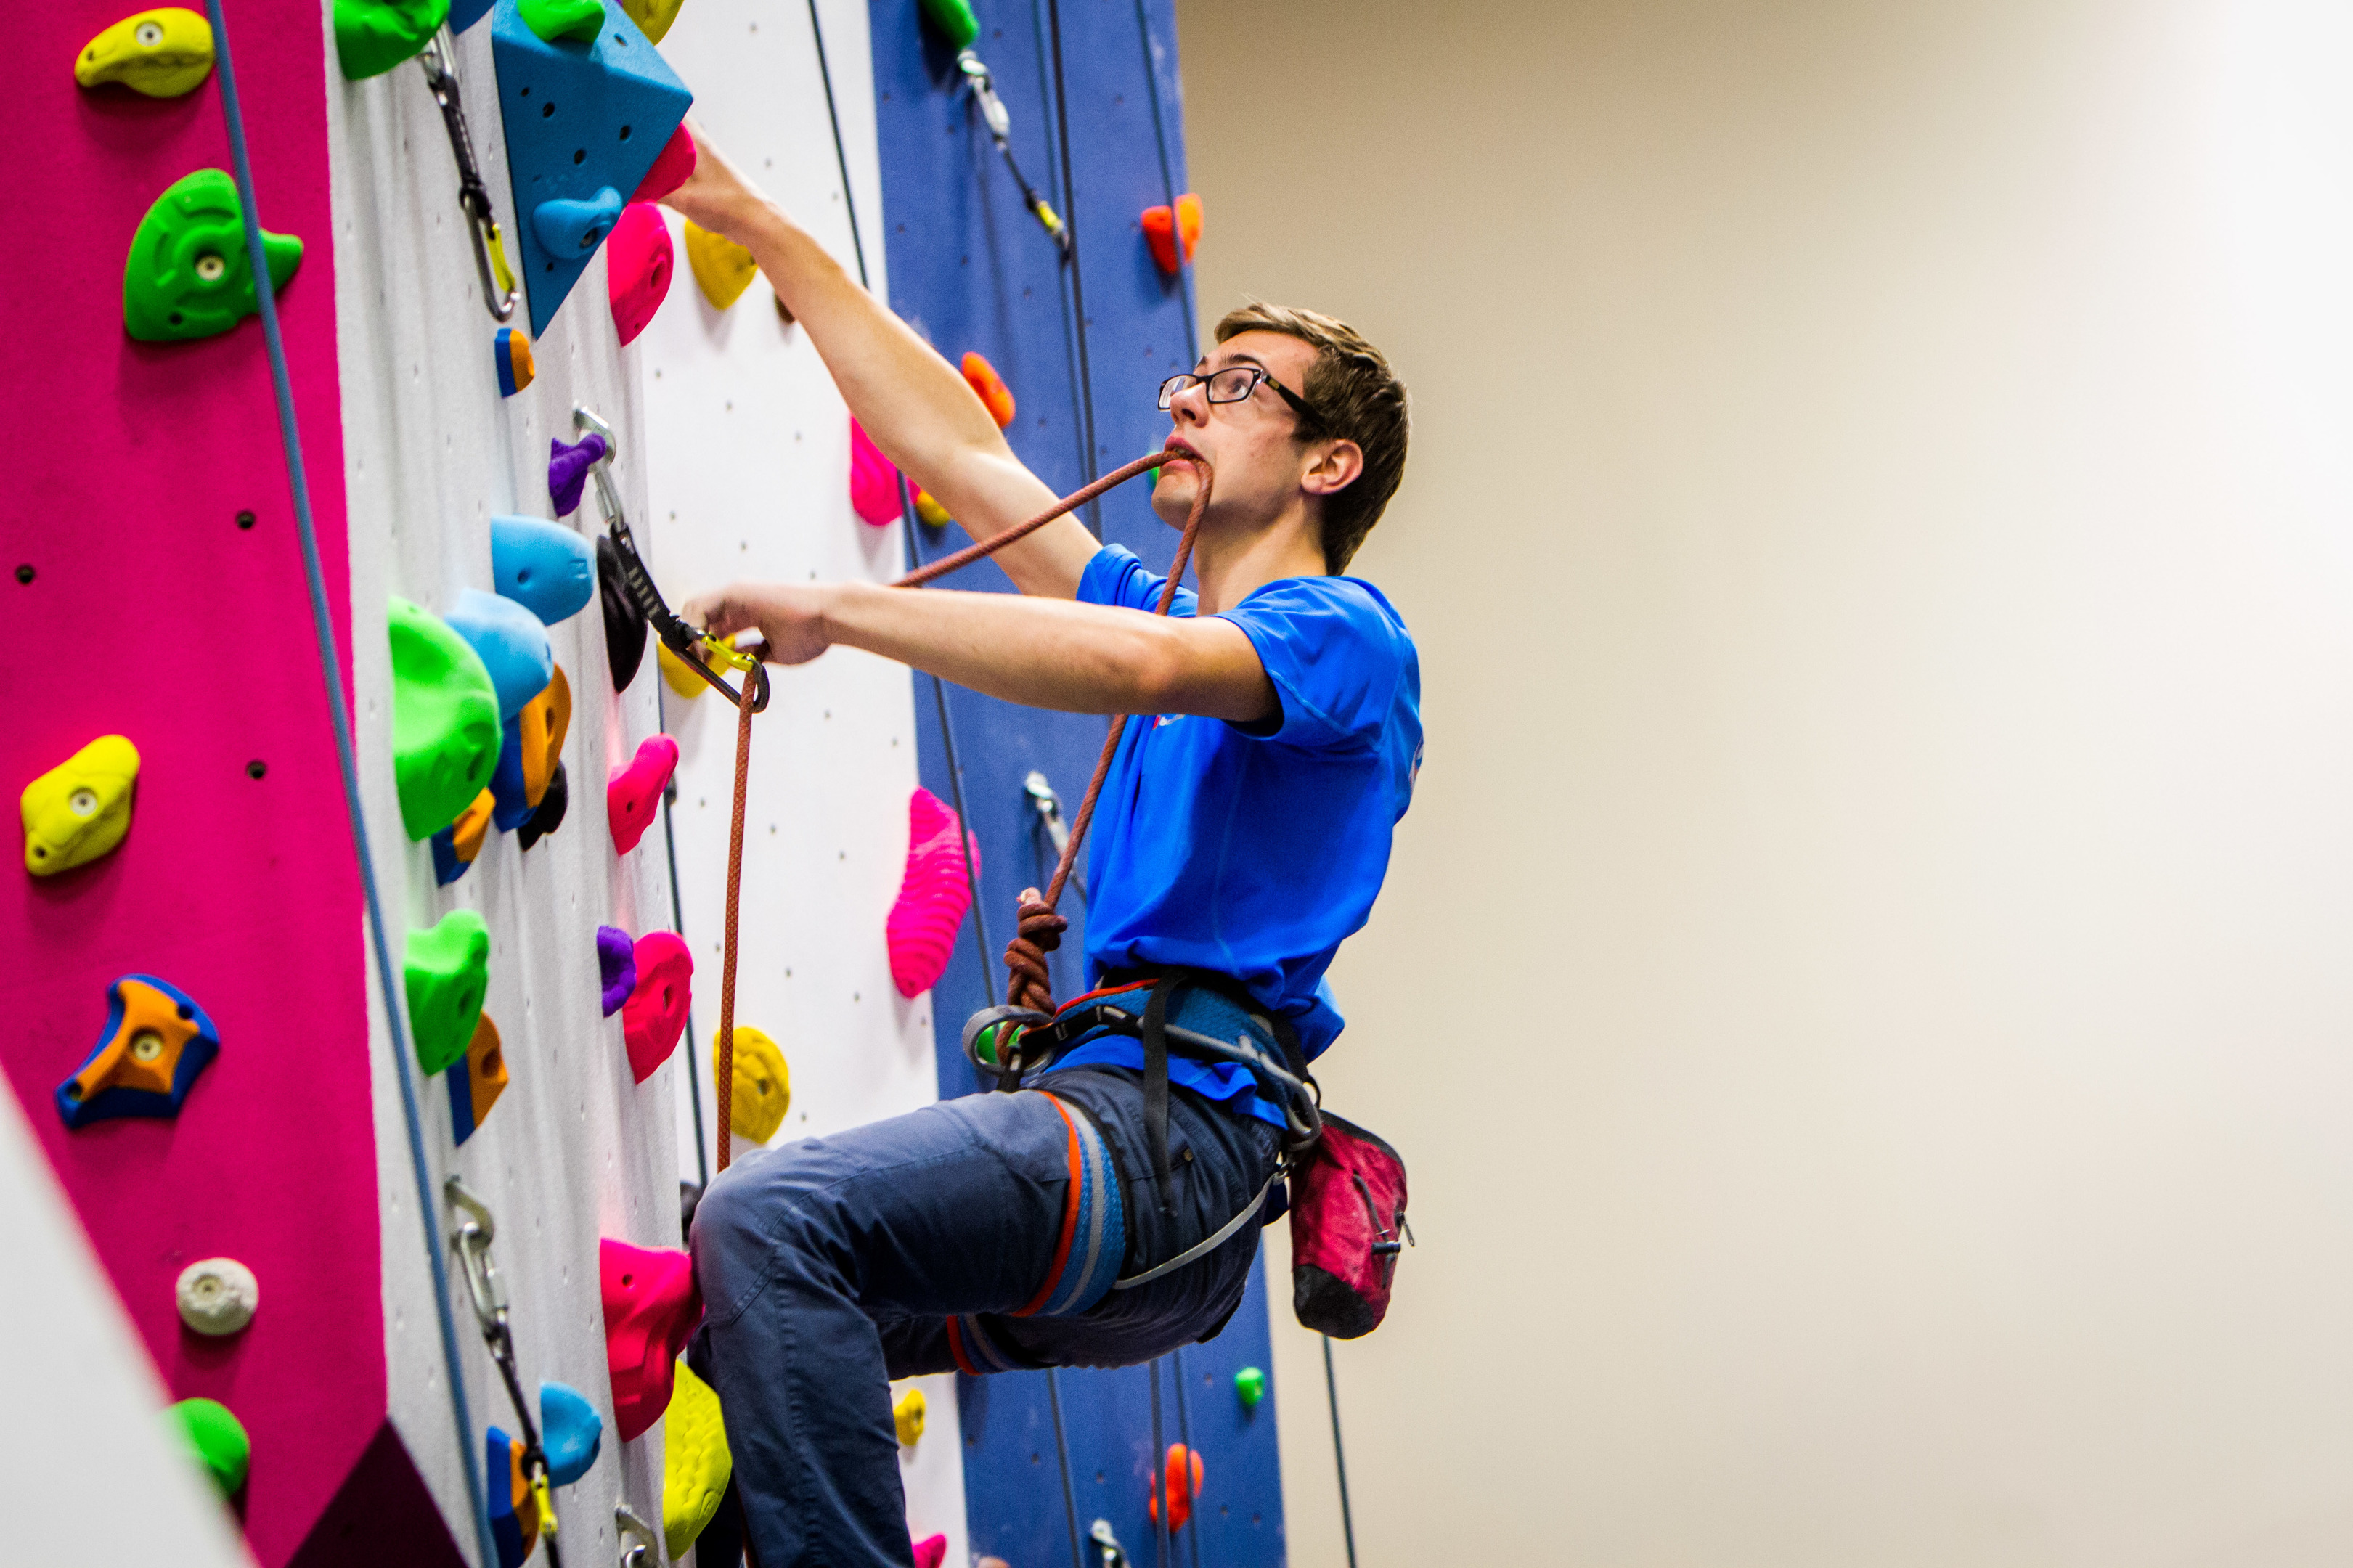 William Bosi climbs the wall at Perth's Academy of Sport and Wellbeing, 